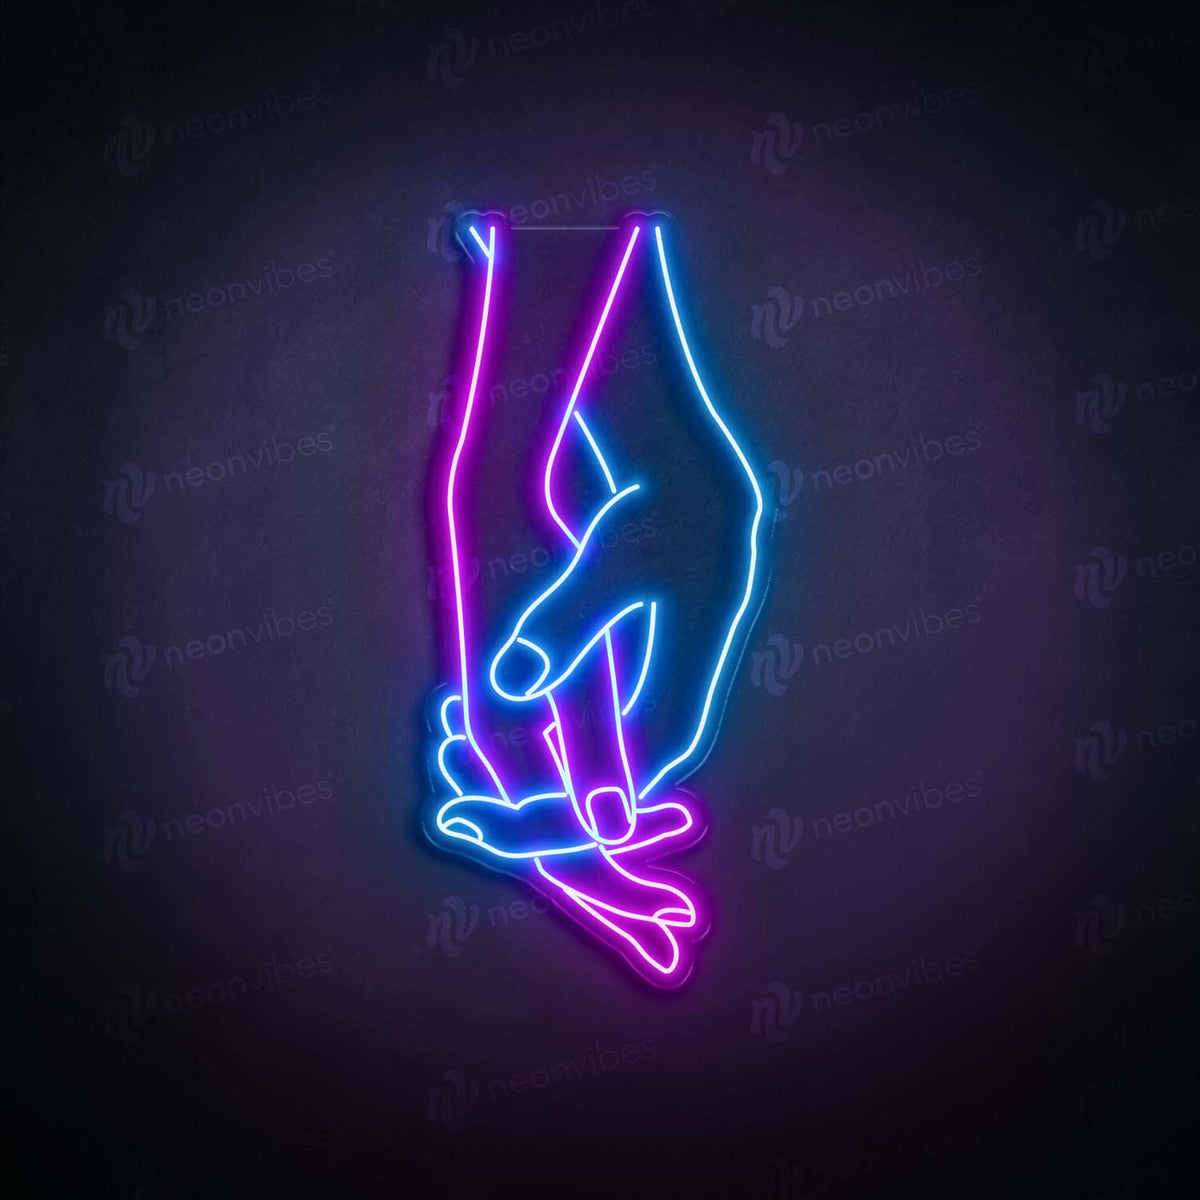 Holding hands neon sign